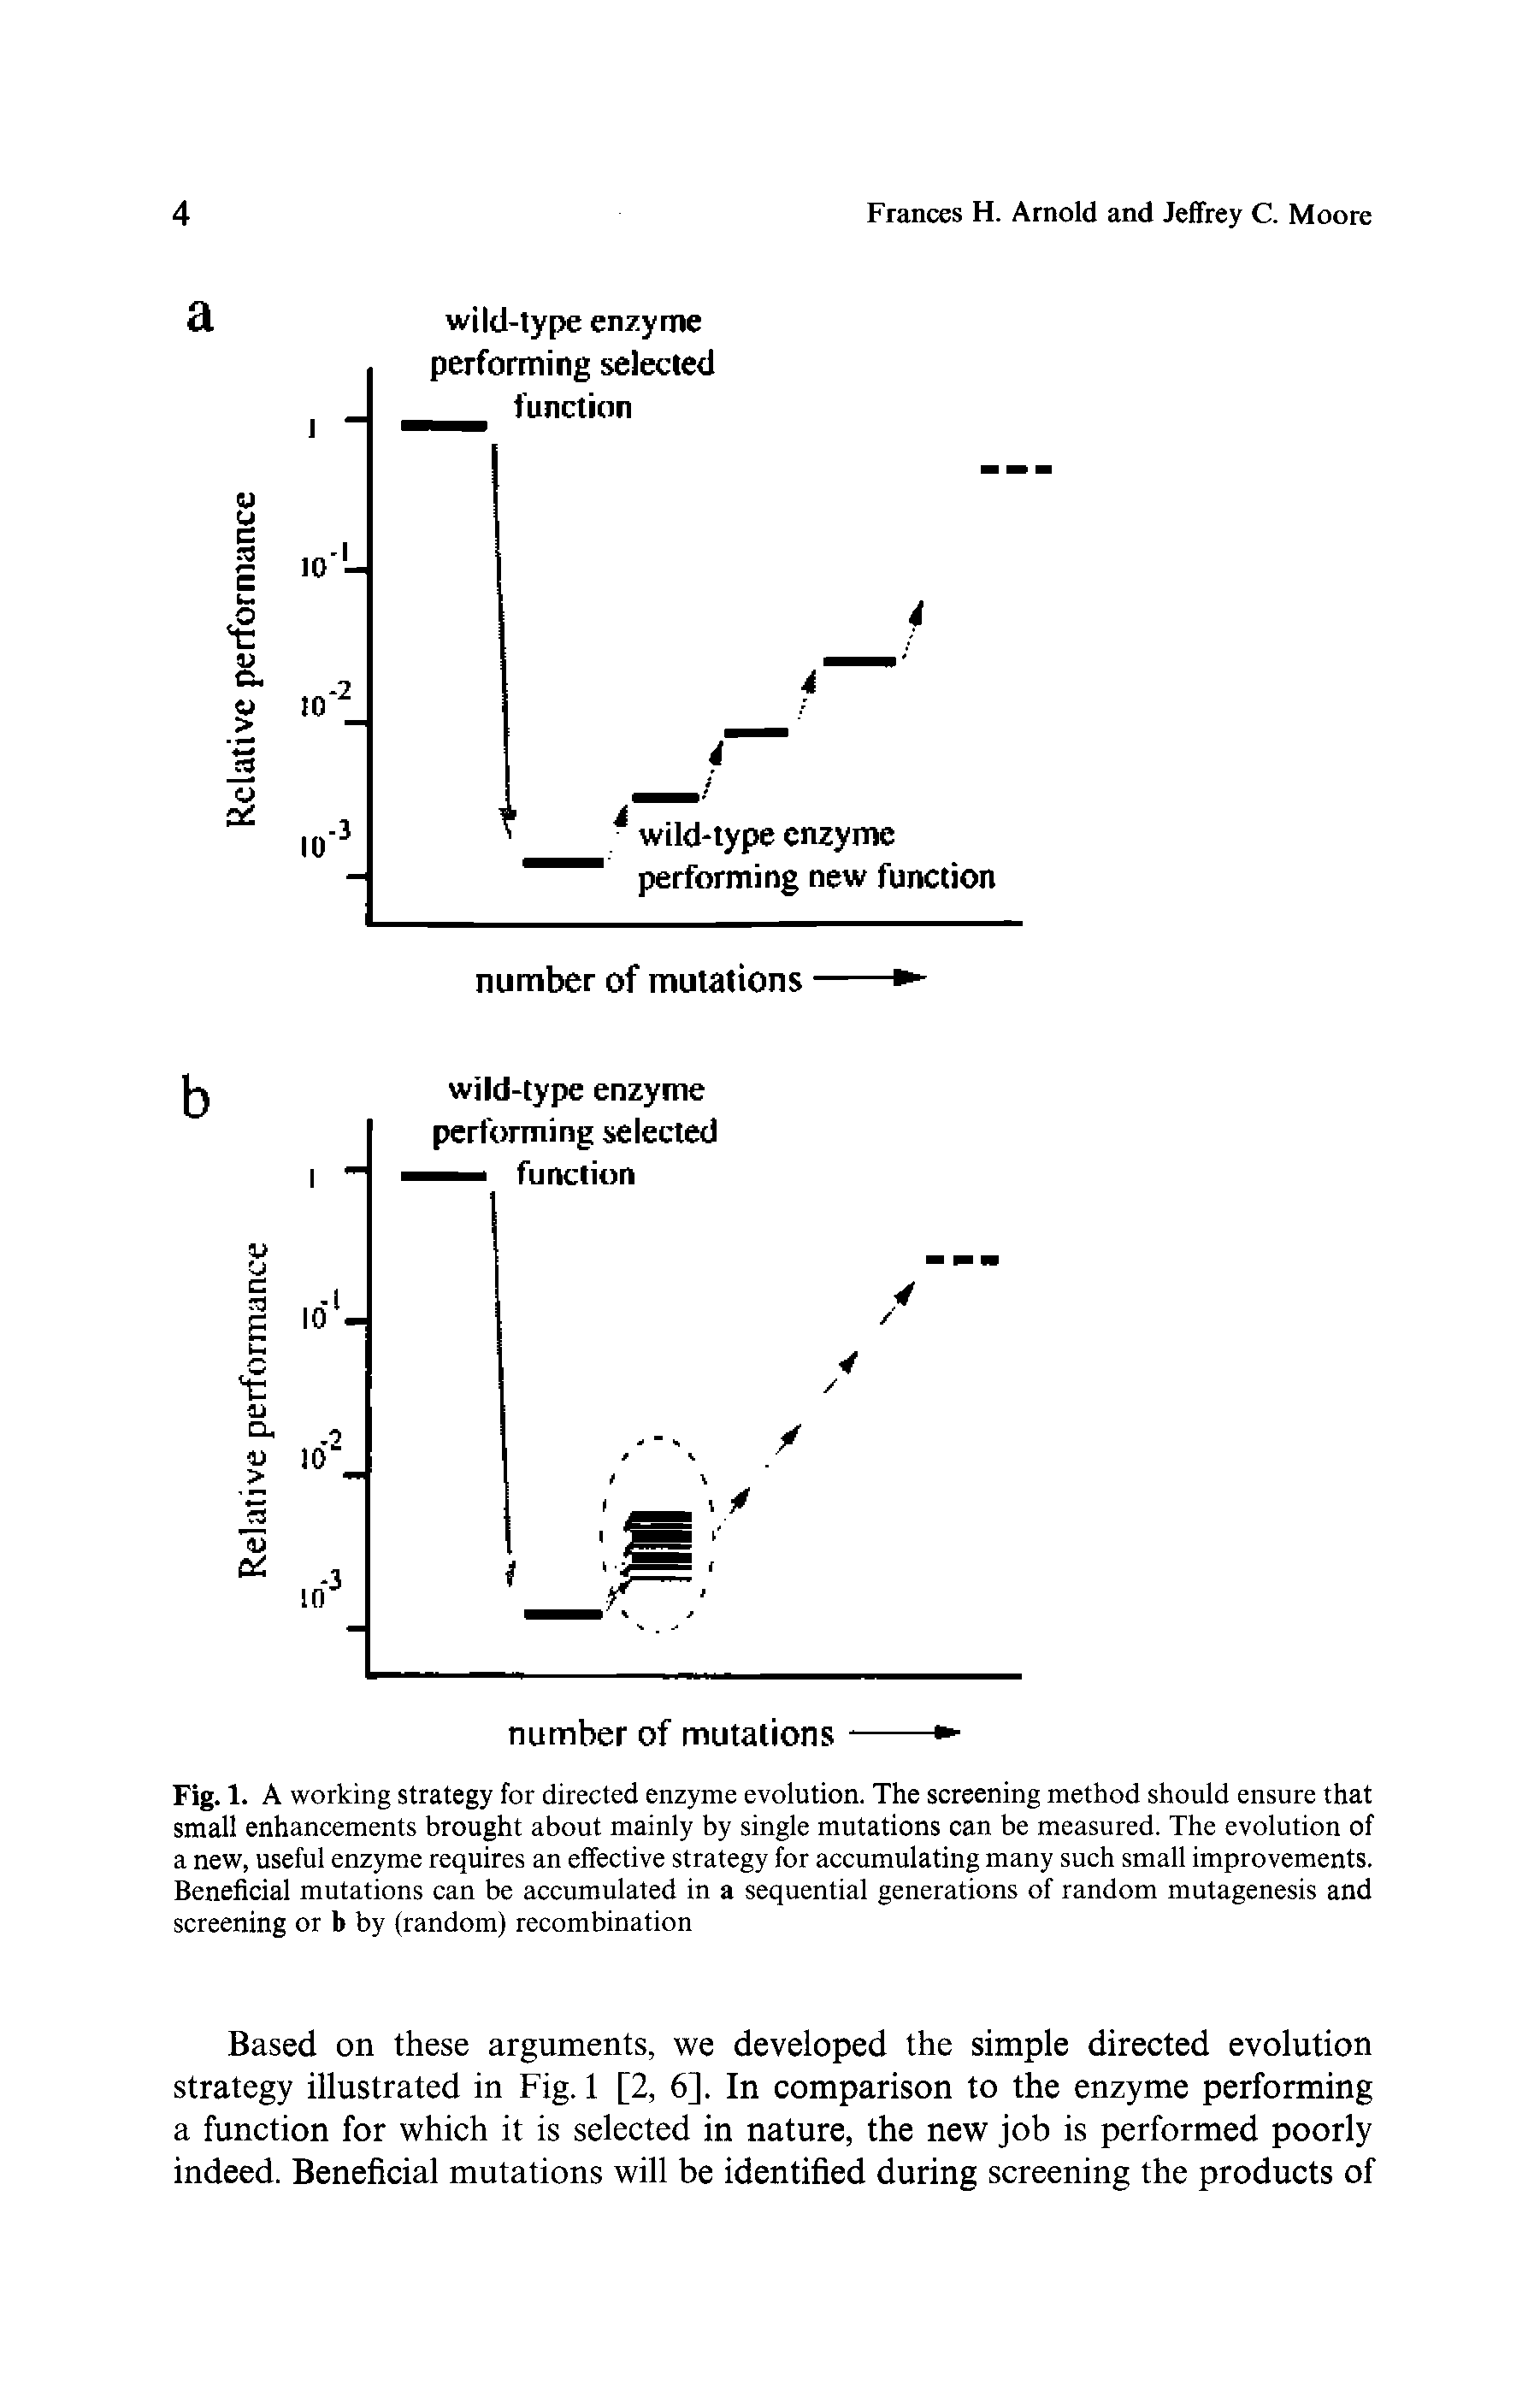 Fig. 1. A working strategy for directed enzyme evolution. The screening method should ensure that small enhancements brought about mainly by single mutations can be measured. The evolution of a new, useful enzyme requires an effective strategy for accumulating many such small improvements. Beneficial mutations can be accumulated in a sequential generations of random mutagenesis and screening or b by (random) recombination...